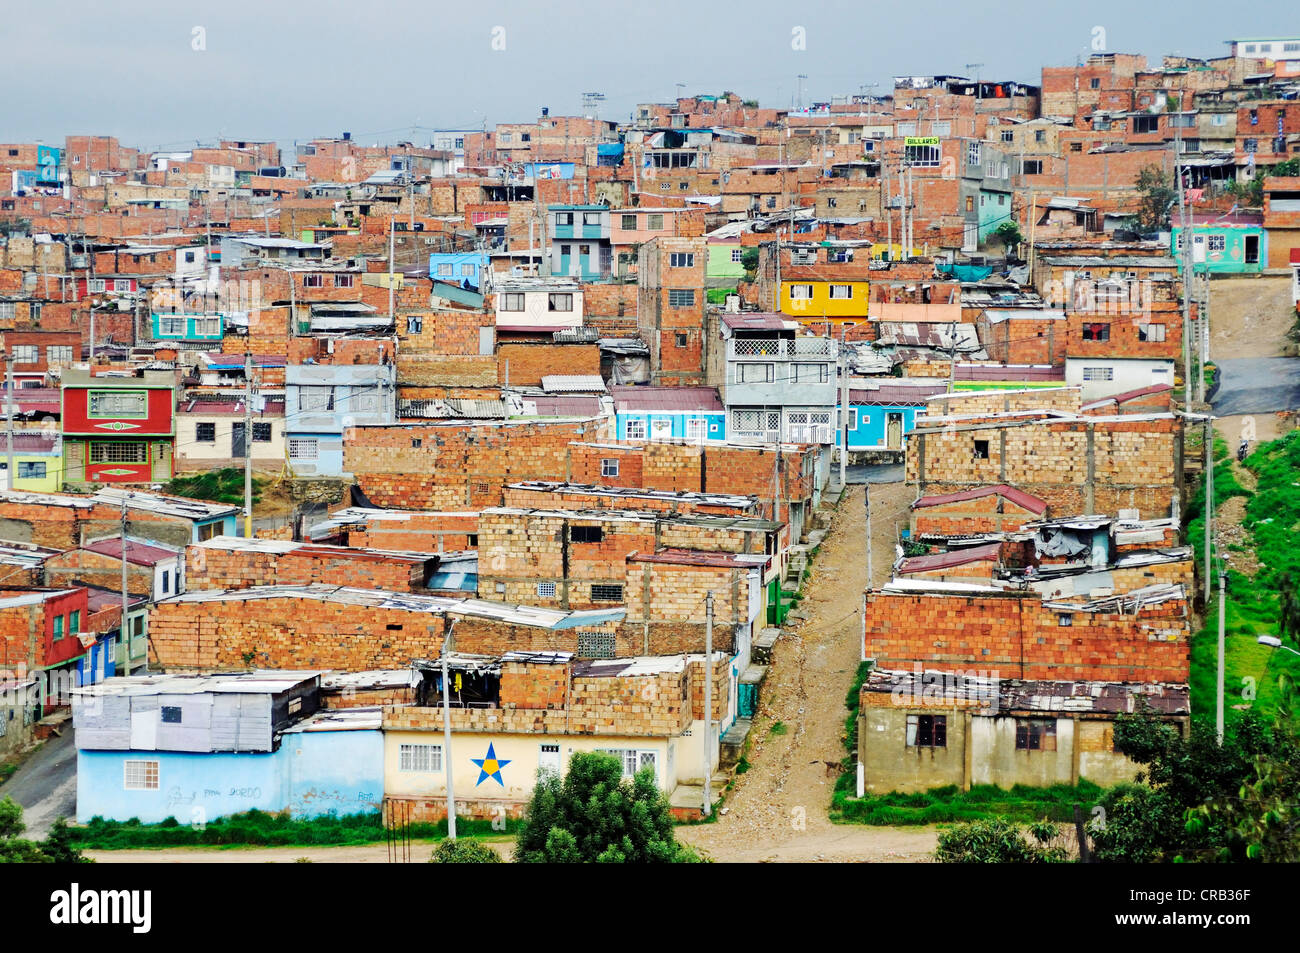 Slums, poor district of Ciudad Bolivar, fringes of the capital Bogota, Colombia, South America, Latin America Stock Photo